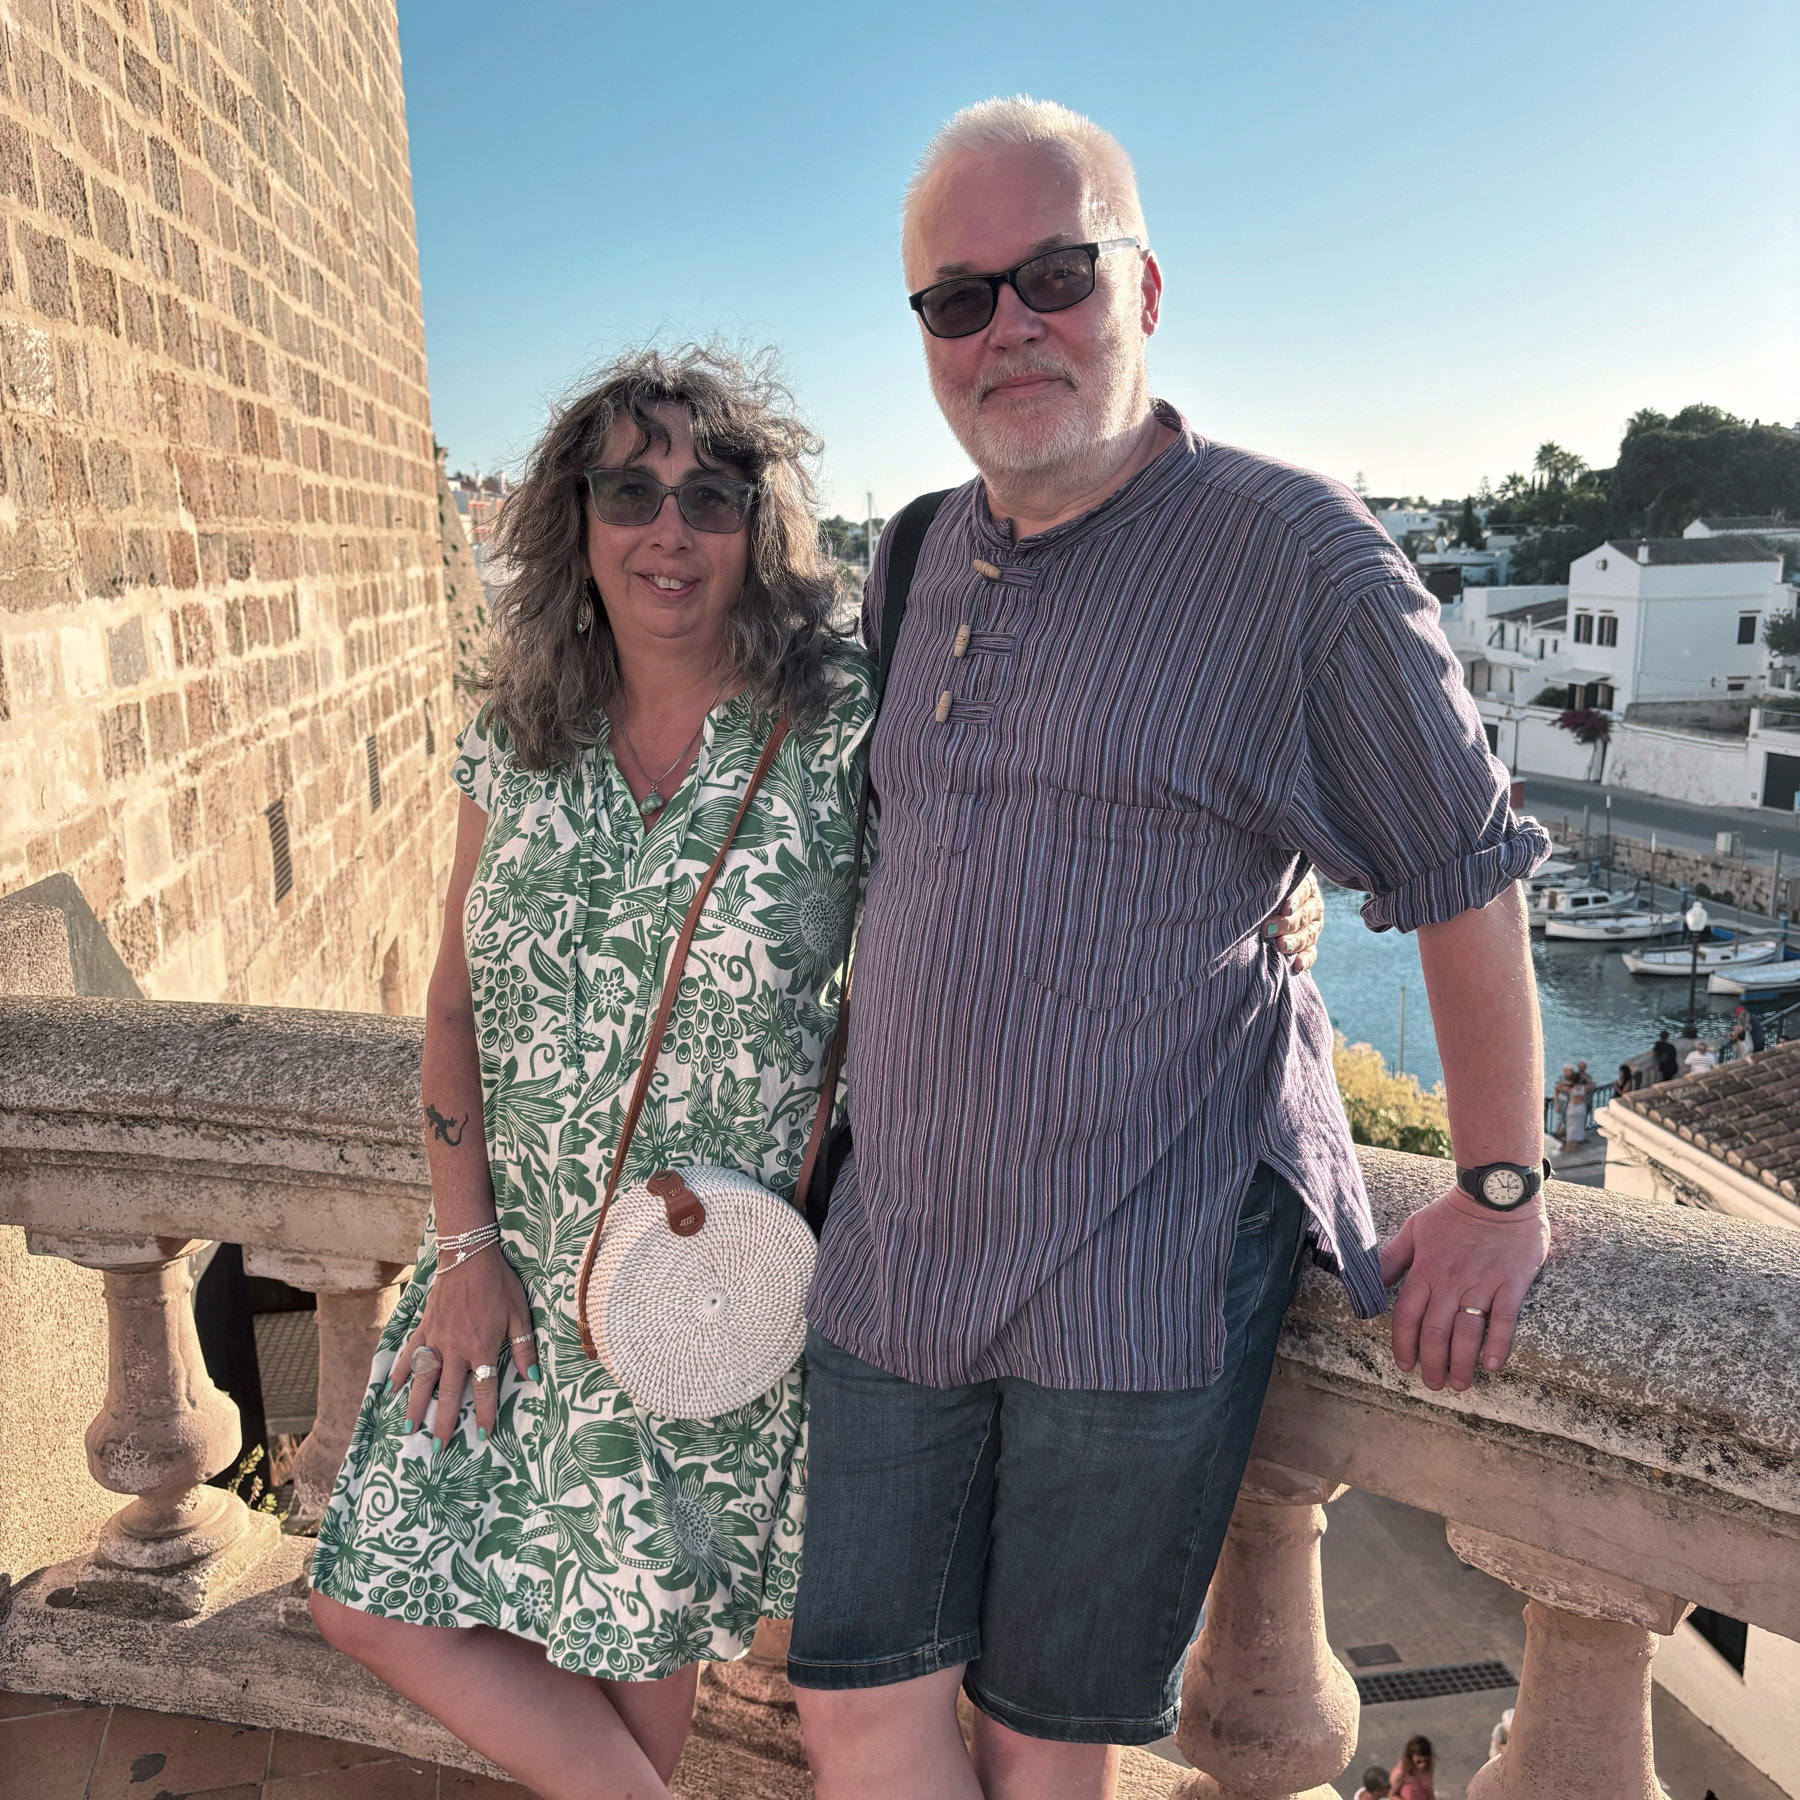 A couple standing together, posing for a photo on a stone terrace with a scenic backdrop of a coastal town. The man is wearing sunglasses, a striped shirt, and shorts, while the woman is in a green patterned dress with a white woven handbag.